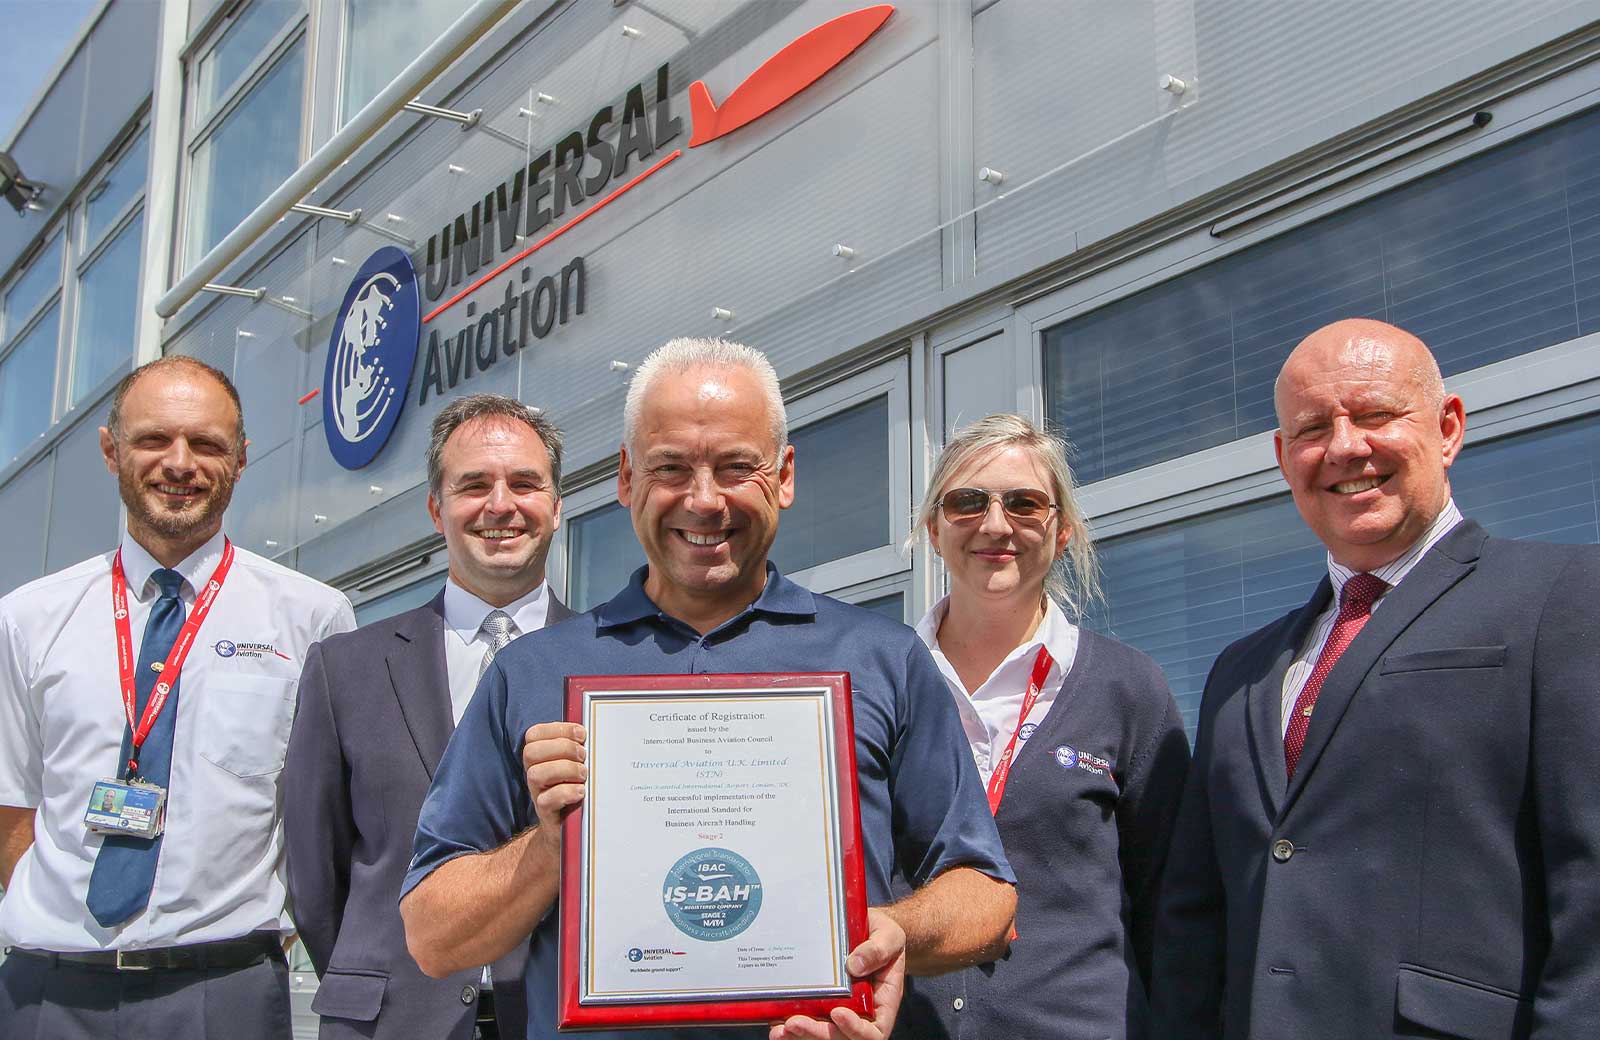 Universal Aviation UK, based at London-Stansted International Airport (EGSS) has earned Stage 2 registration under the International Standard for Business Aviation Handling (IS-BAH).